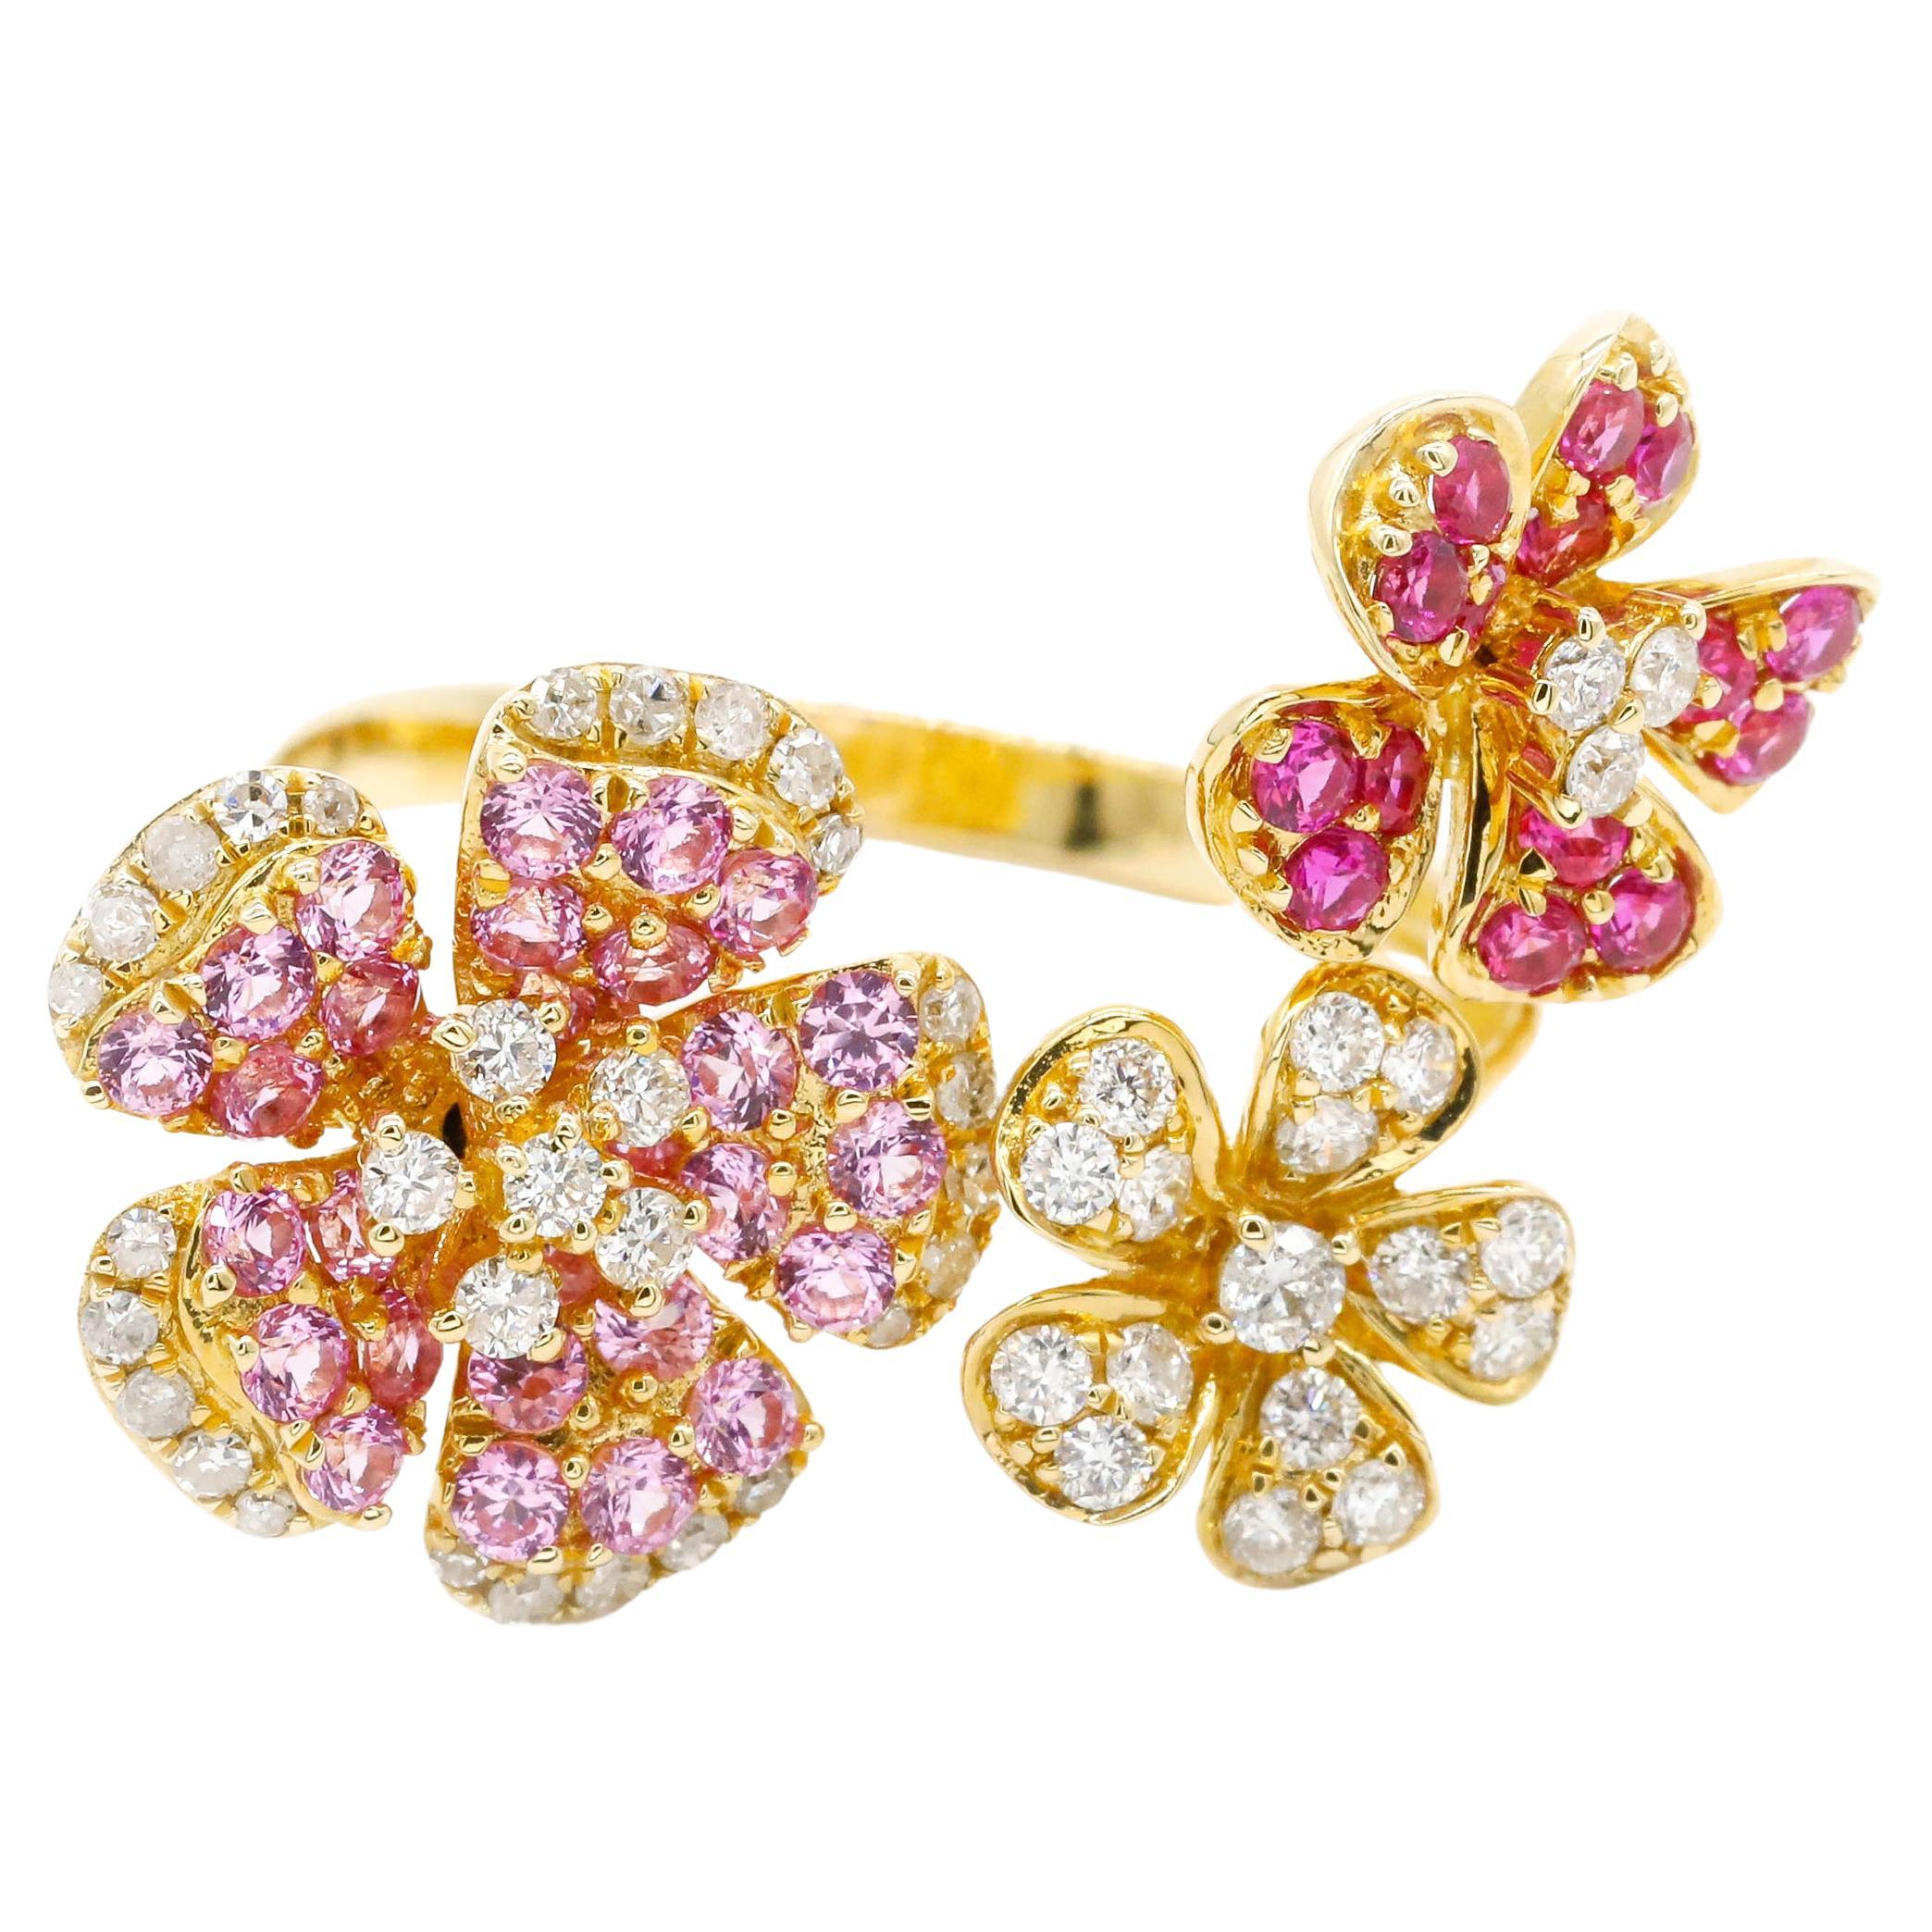 14 Karat Yellow Gold Ring 1.08 Carat Pink Sapphire and Diamond Pave Floral Ring

This modern ring features a total of 0.49 carats of diamond round shape and 1.08 carats Pink Sapphire Gemstone Set in 14K Yellow Gold.

We guarantee all products sold